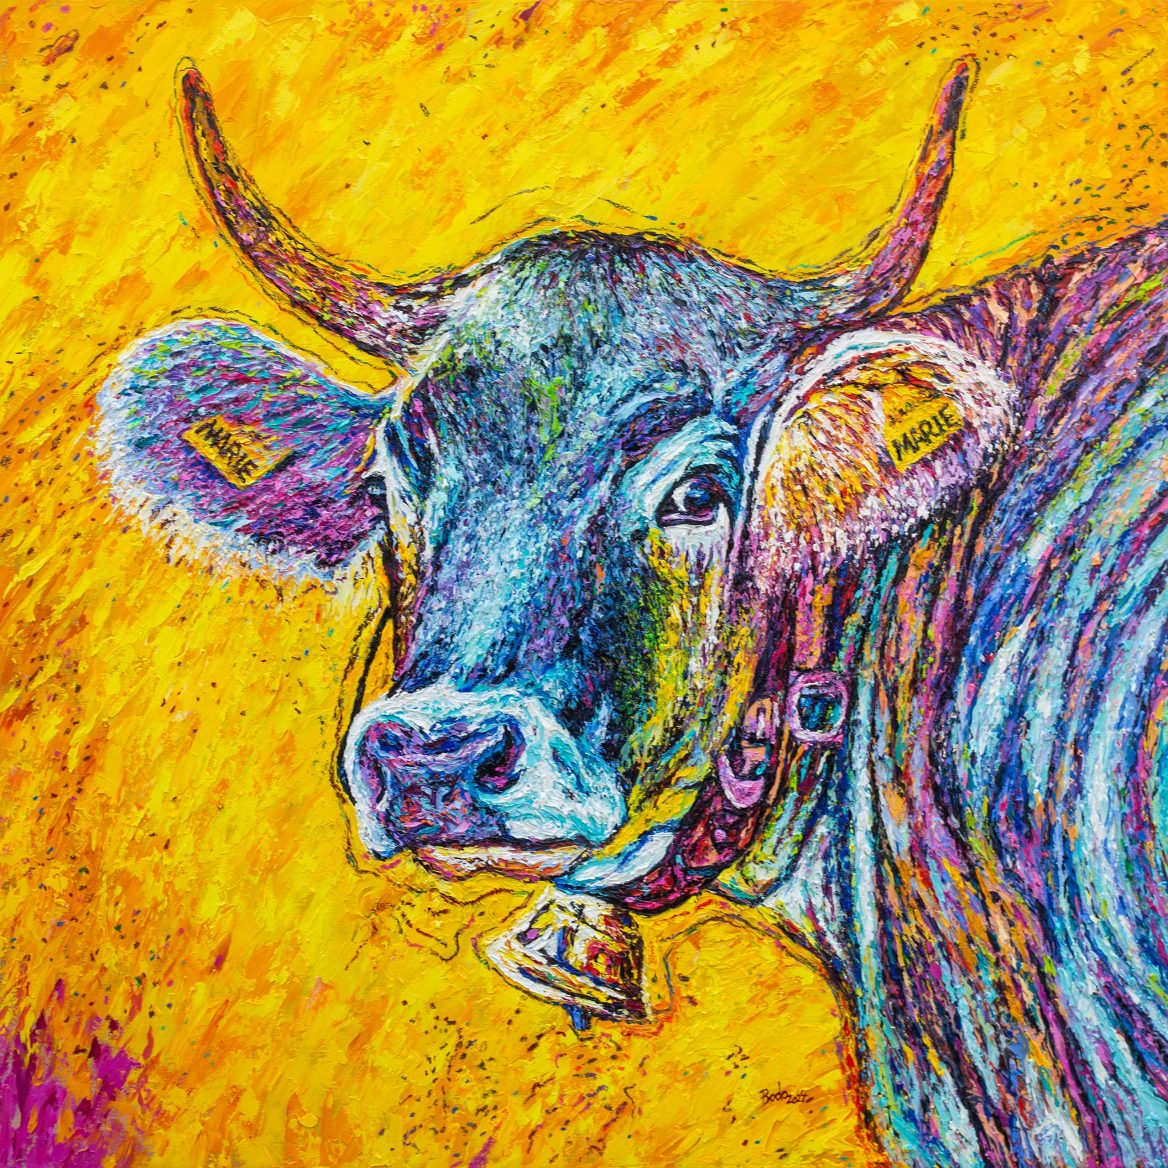 Painted Portrait of cow "Marie" by artist Bodo Gsedl